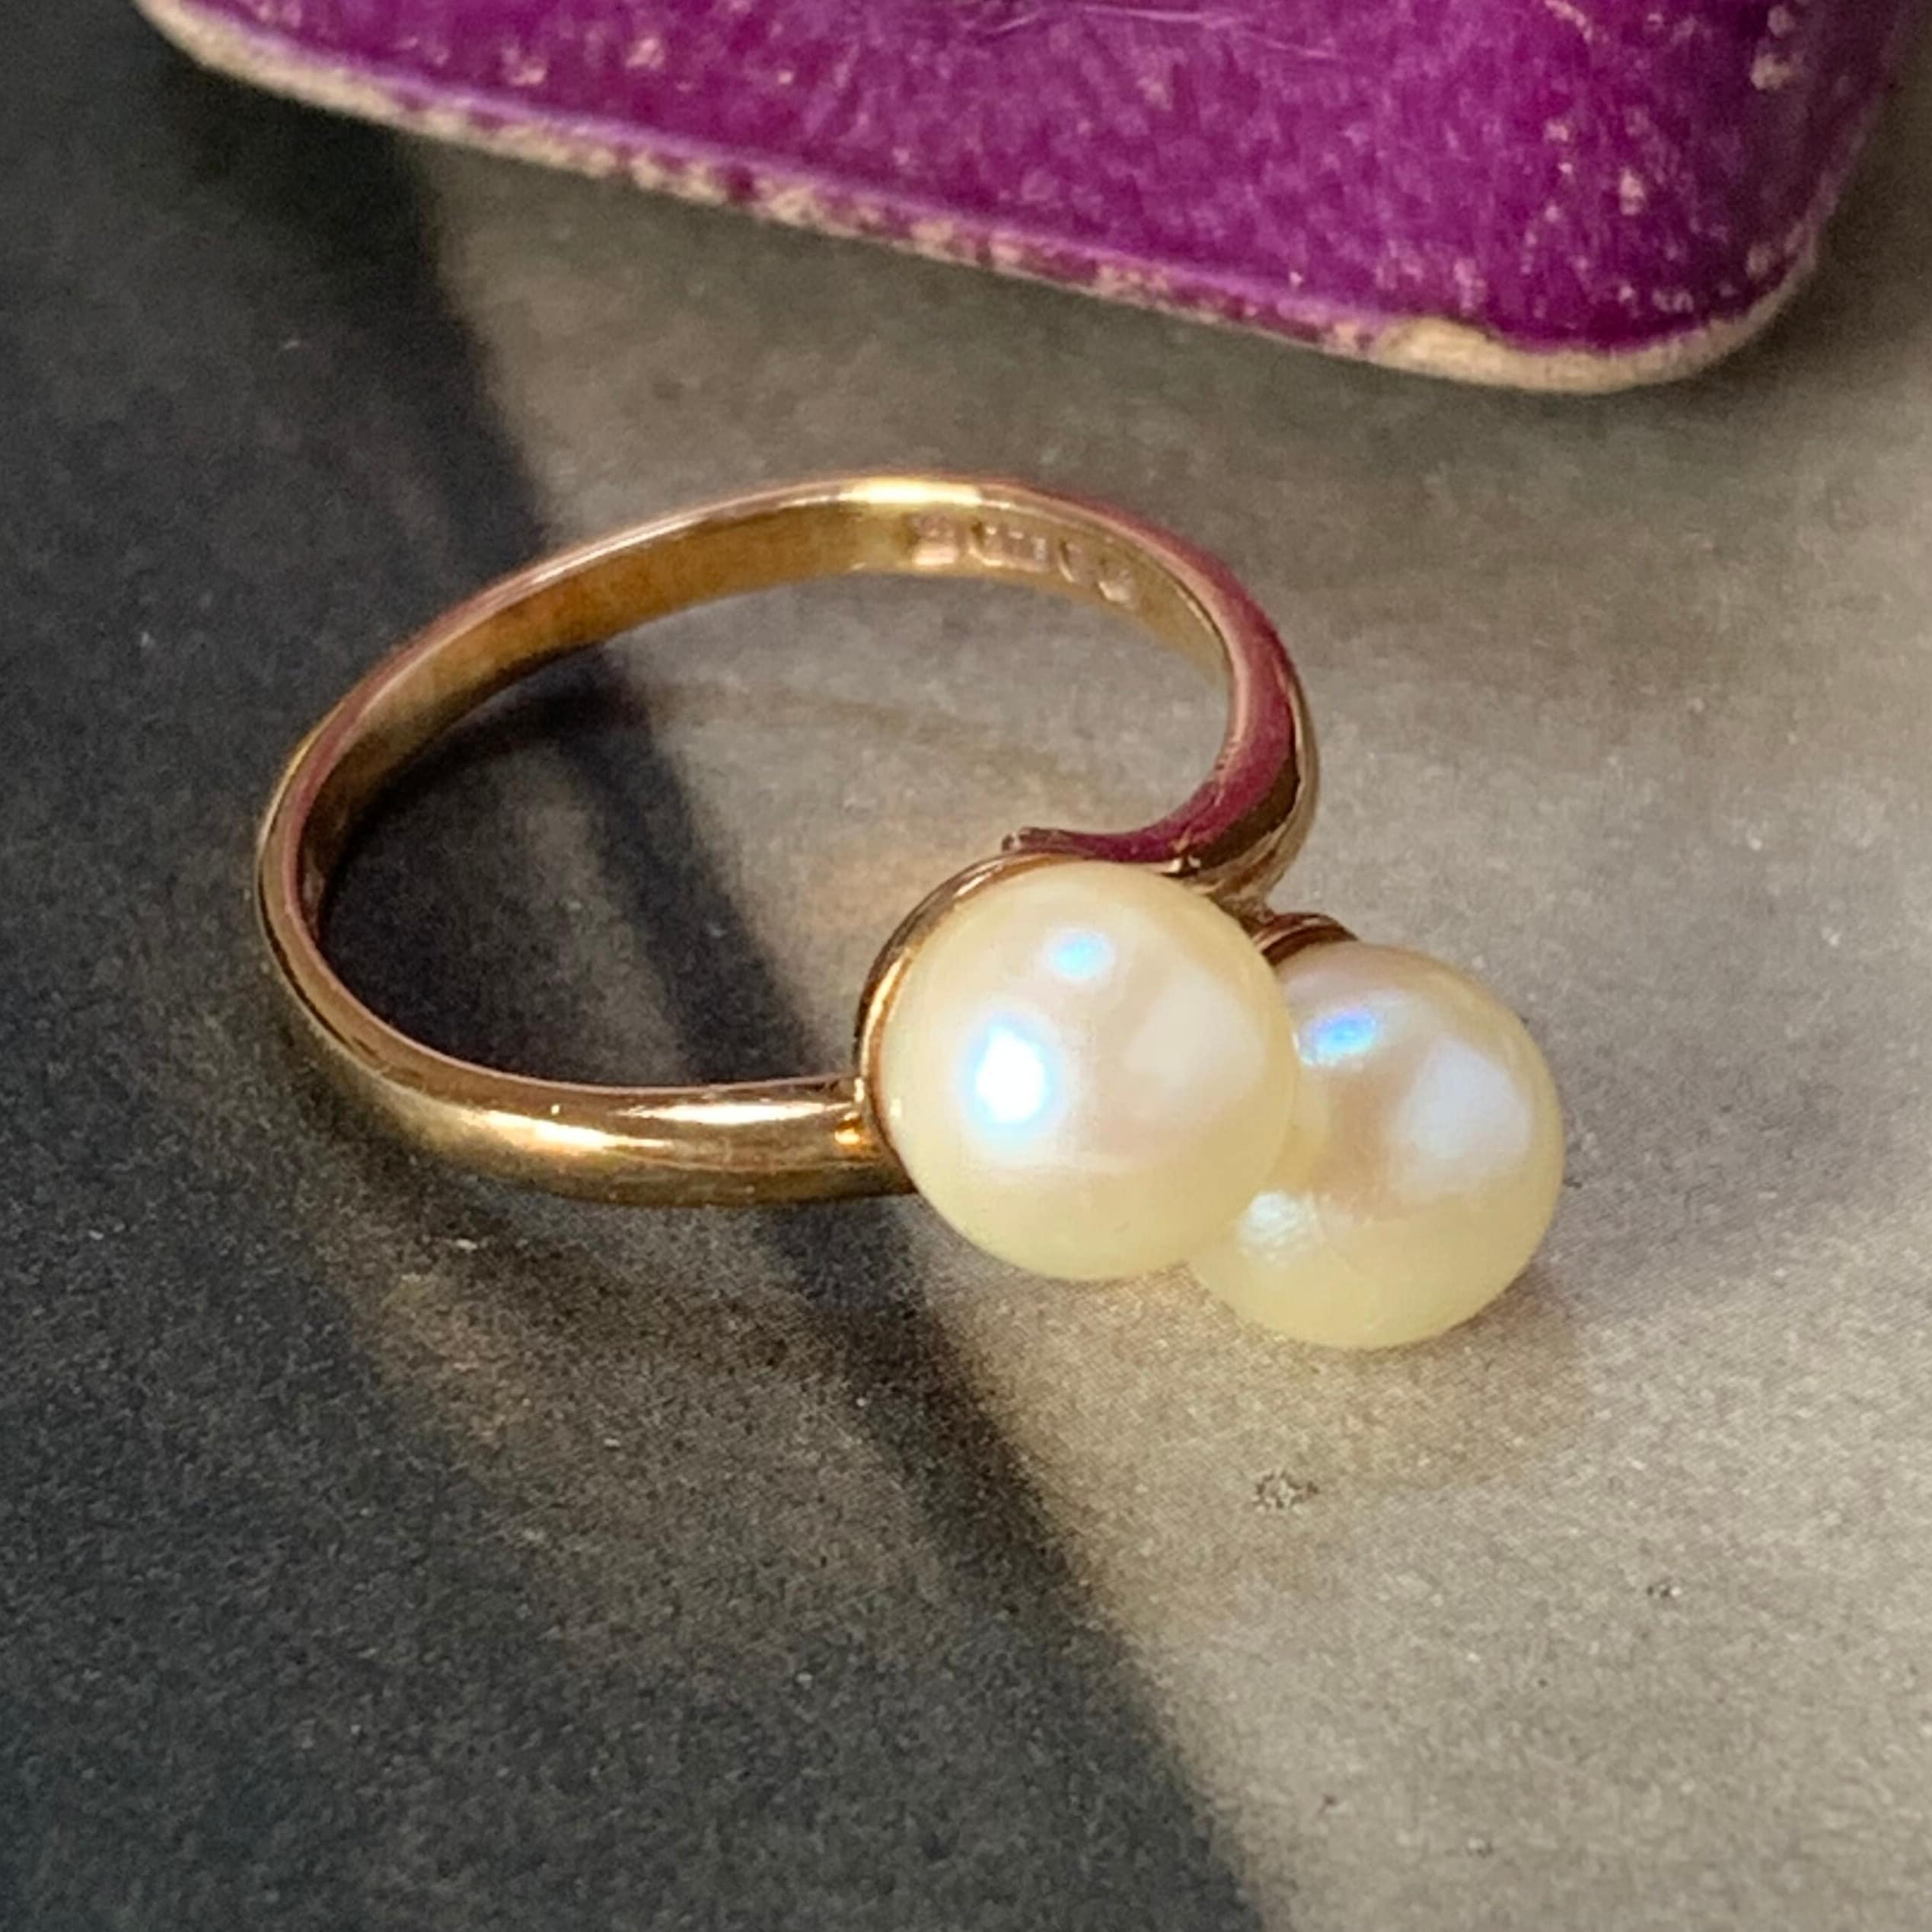 Vintage 9Ct Yellow Gold Twin Pearl Bypass Ring. English Hallmark For London Dates 1975